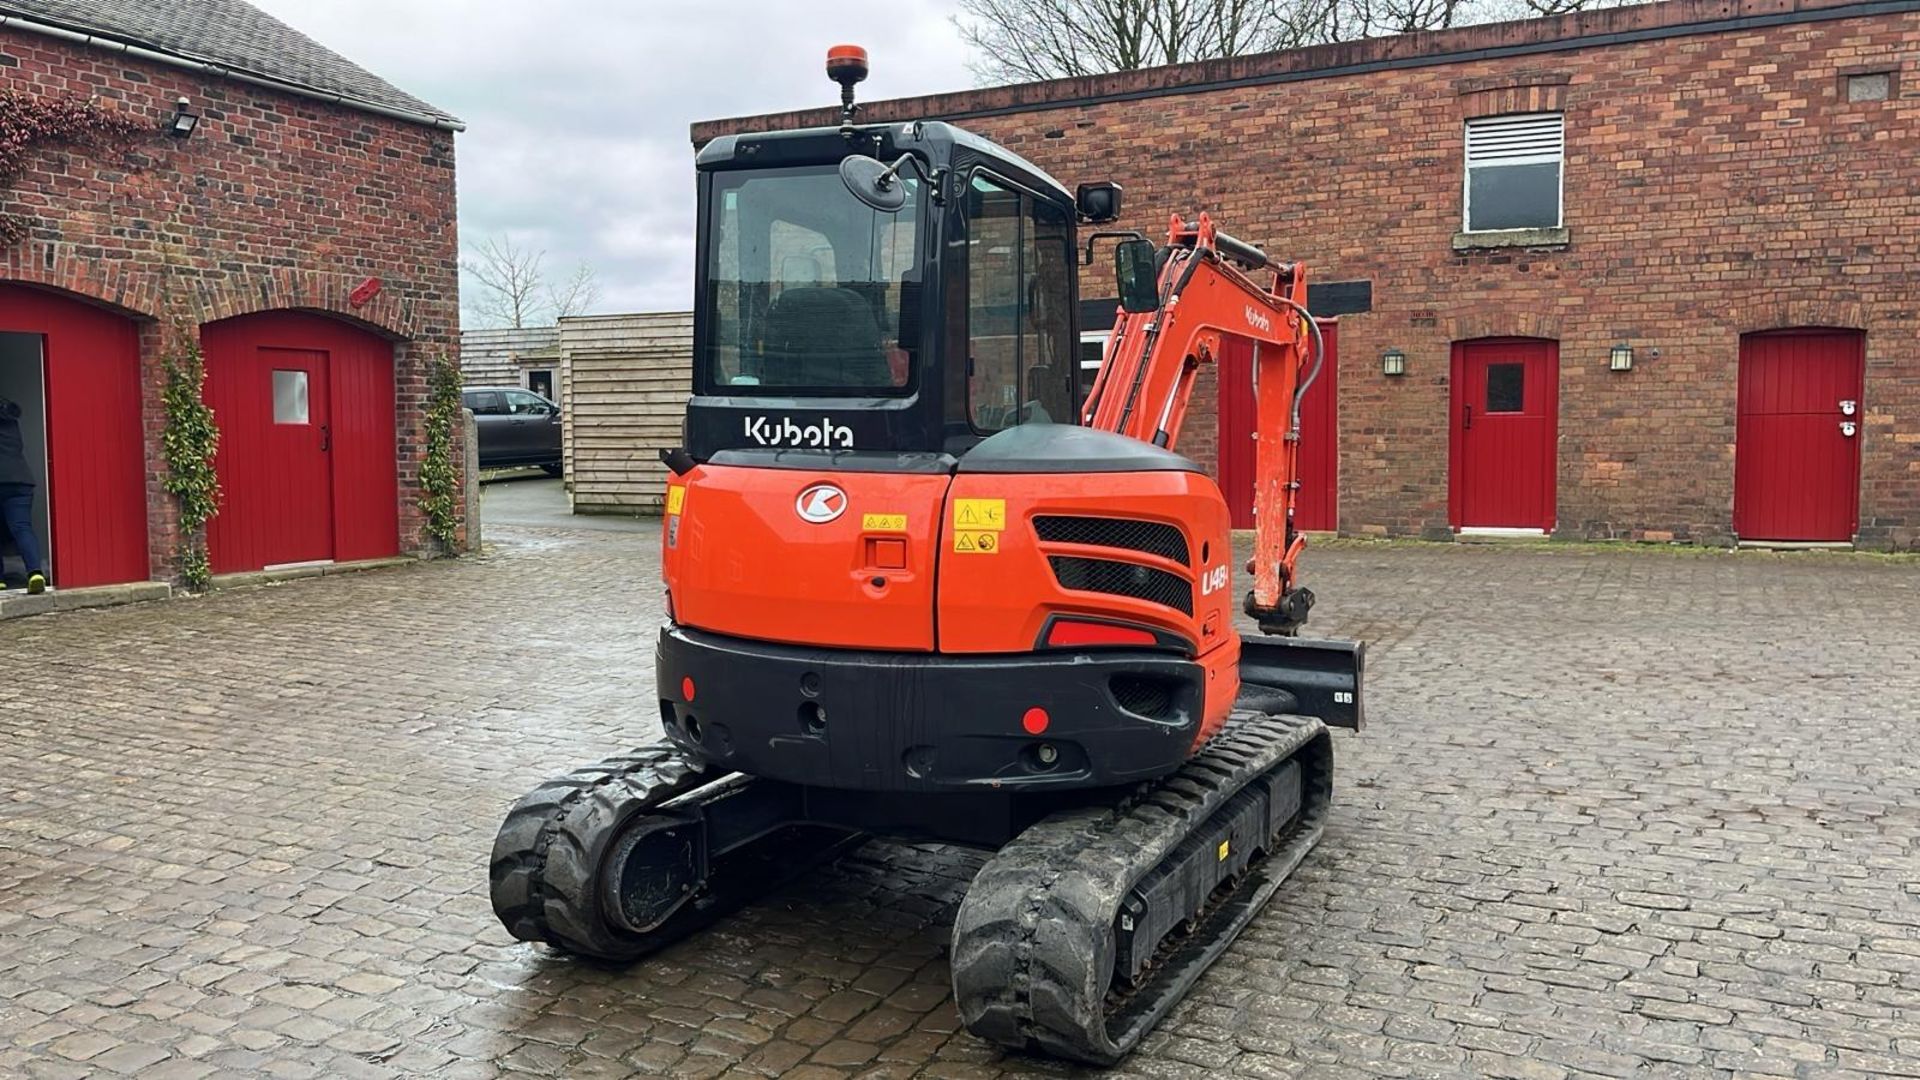 2019 KUBOTA U48-4 COMPACT EXCAVATOR 552 HOURS WITH HYDRAULIC QUICK HITCH TO BE SOLD WITH 4 BUCKETS - Image 4 of 24